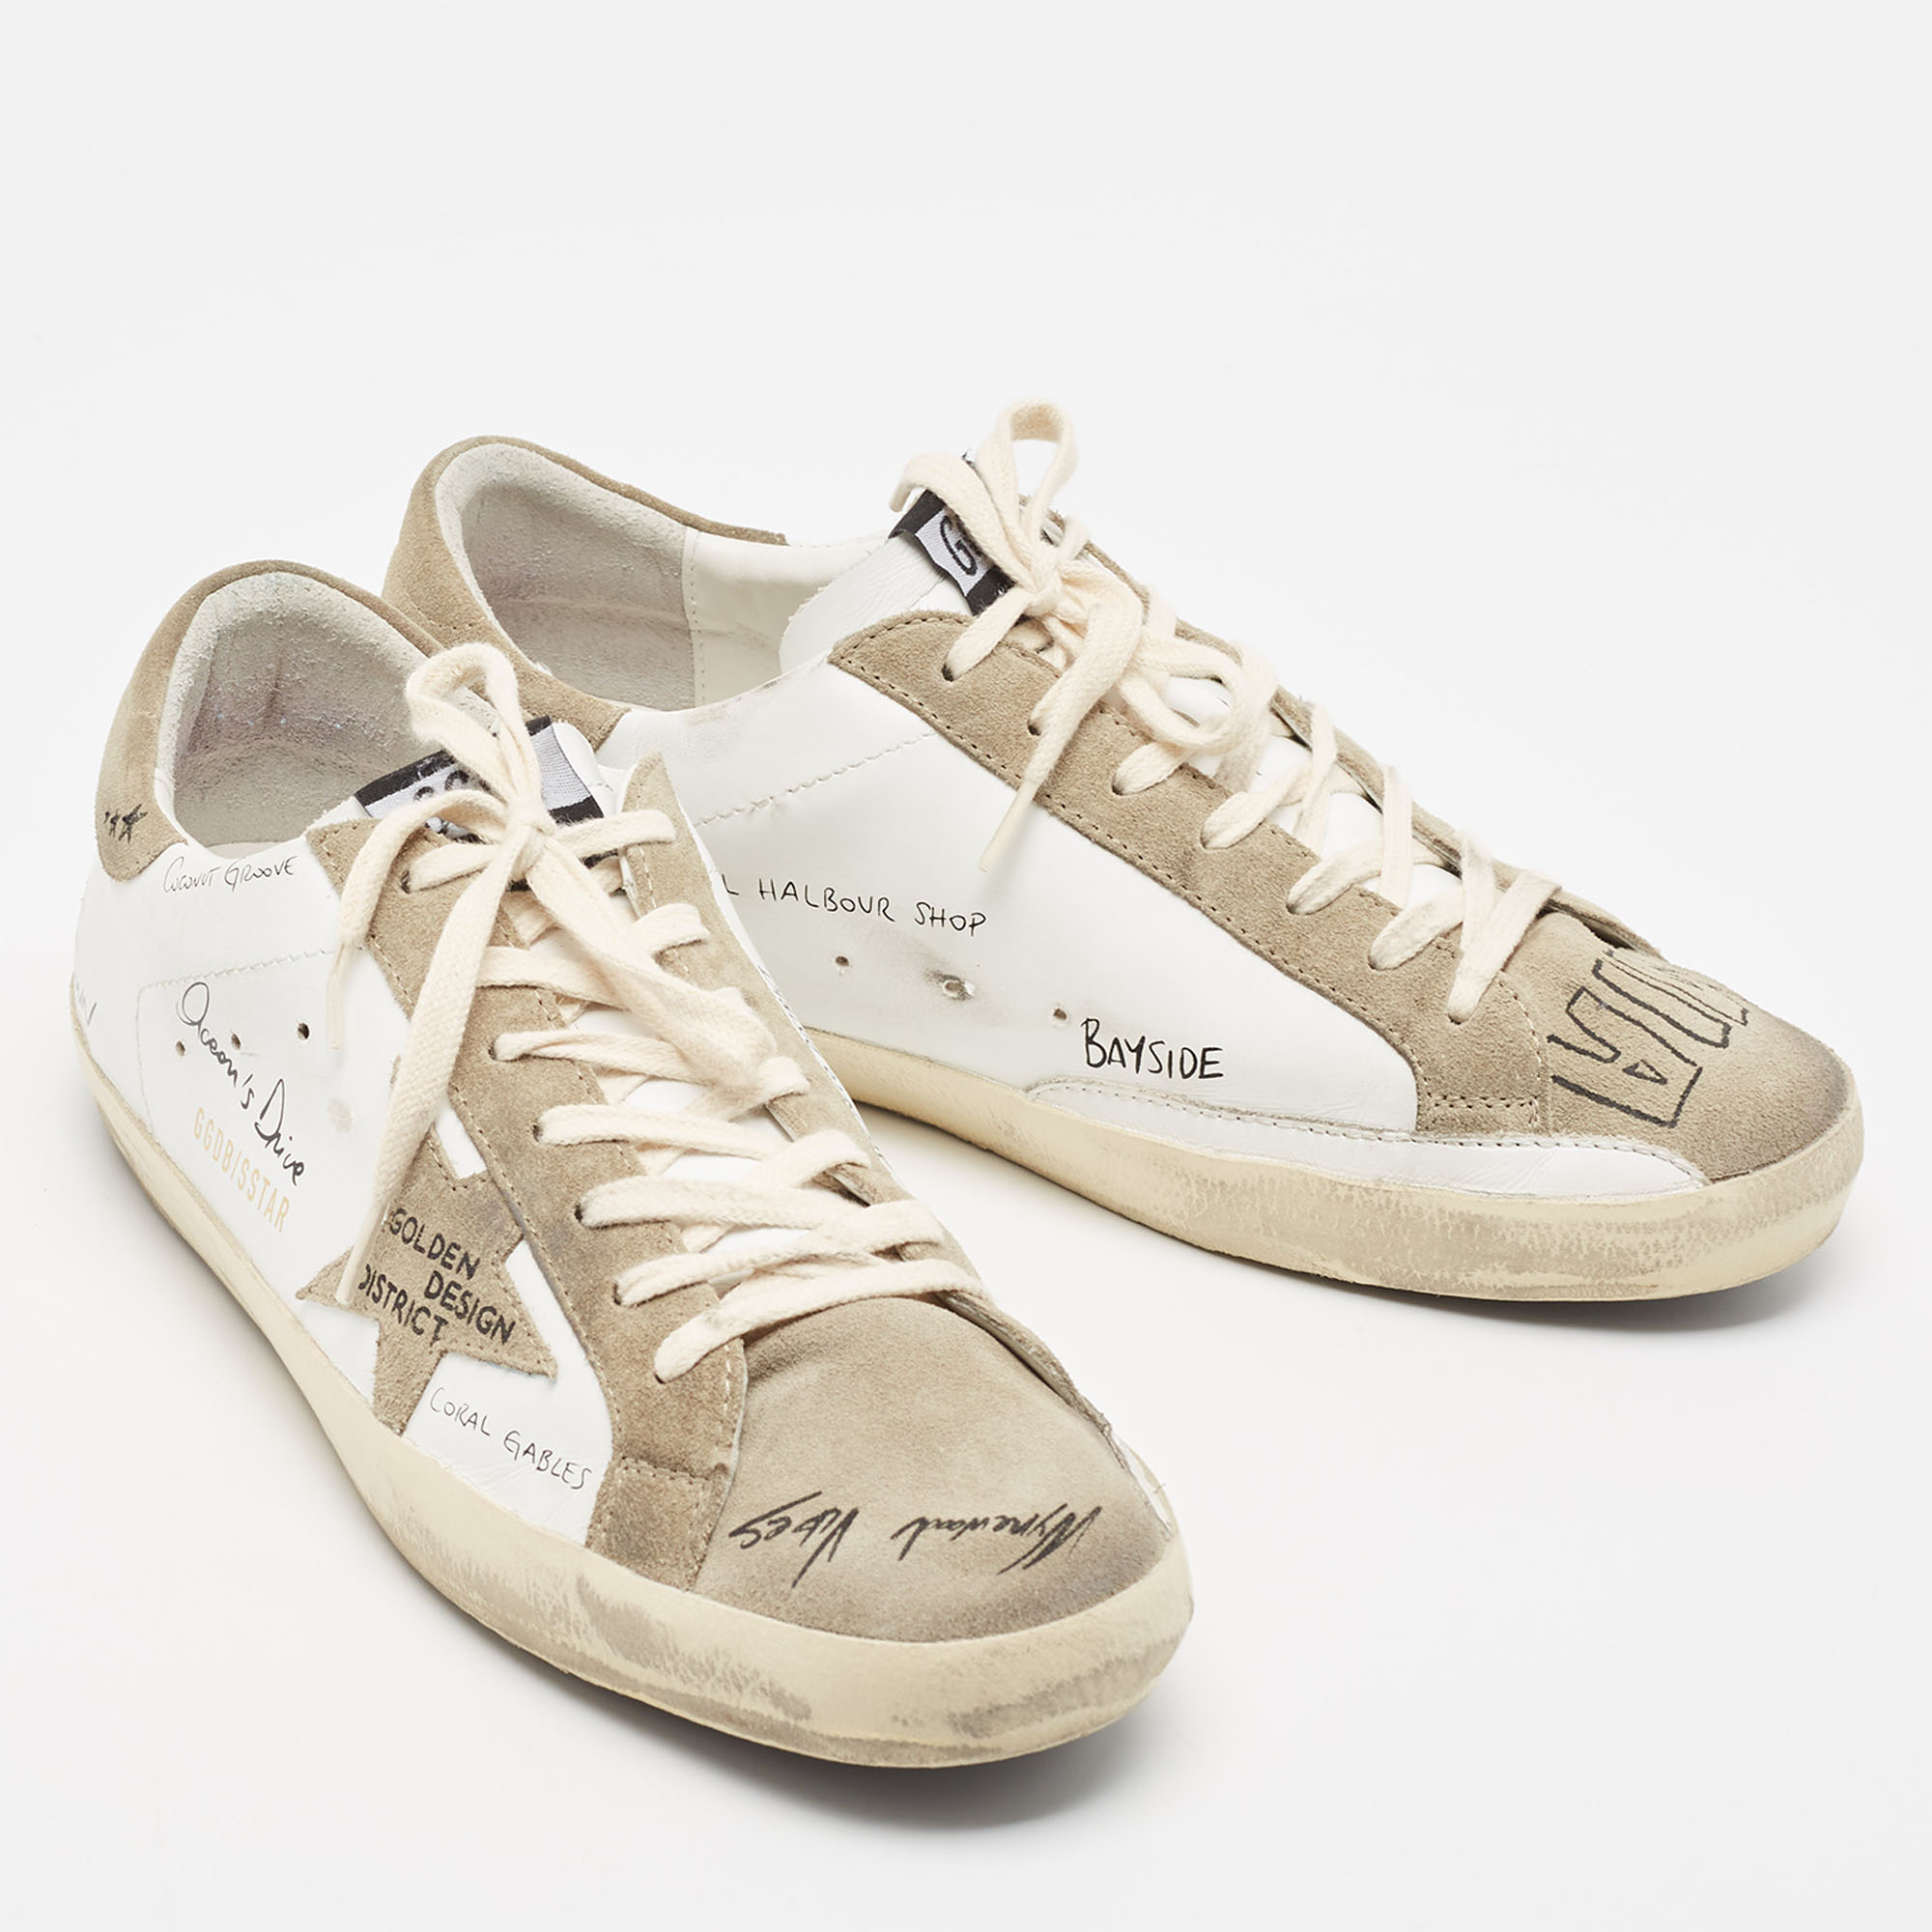 Golden Goose White/Grey Leather And Suede Superstar Sneakers Size 43